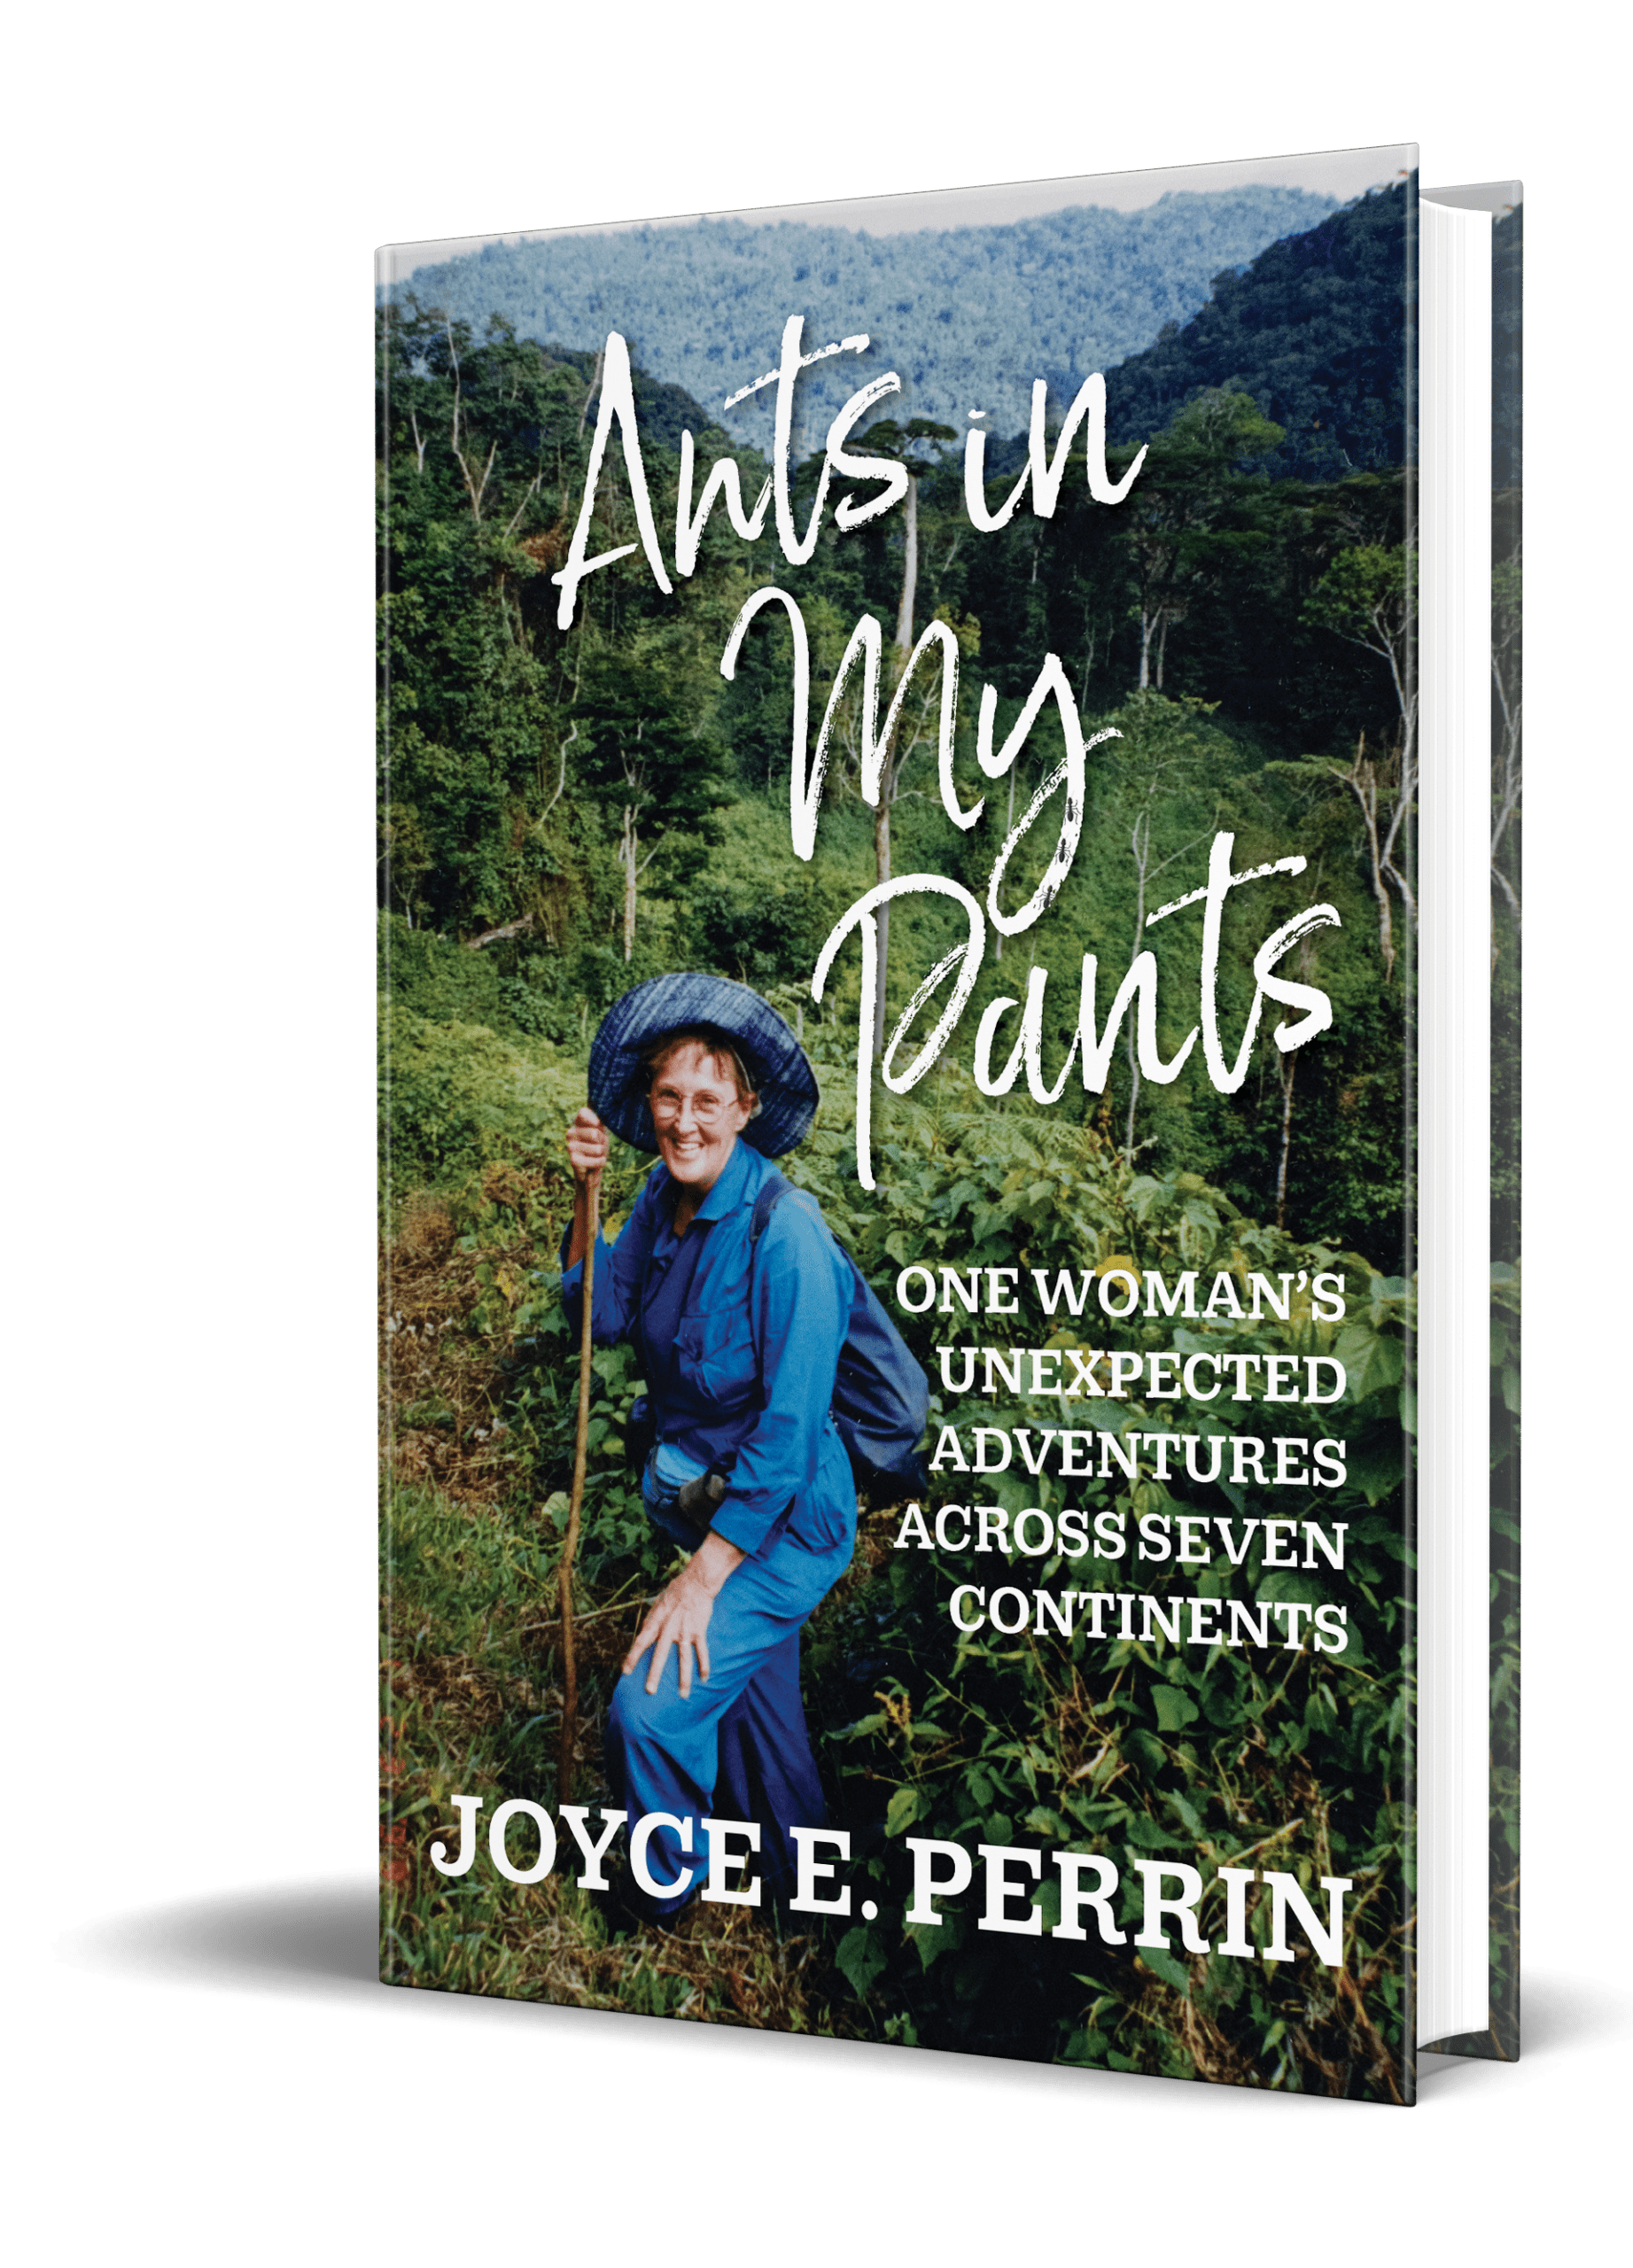 Joyce Perrin never too old to travel solo book